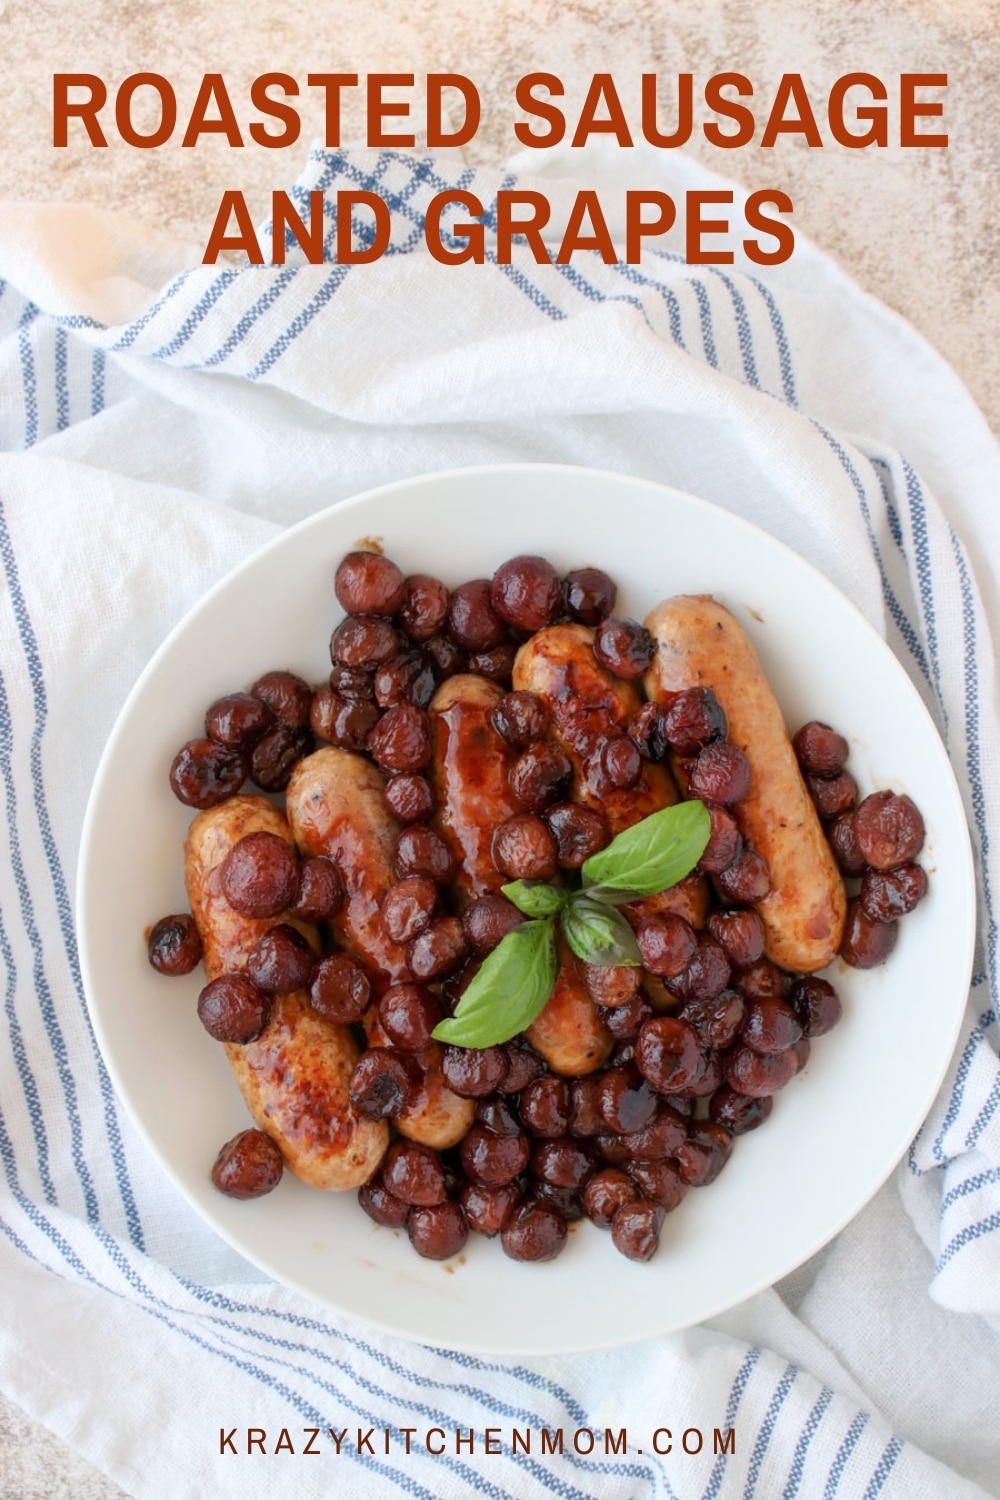 This is one of my favorite ways to make Italian sausage. It's oven-roasted with sweet red grapes and a tangy splash of balsamic. Serve it with cheesy grits and a salad for a full dinner or on a toasted roll with creamy mustard sauce for a casual meal. via @krazykitchenmom